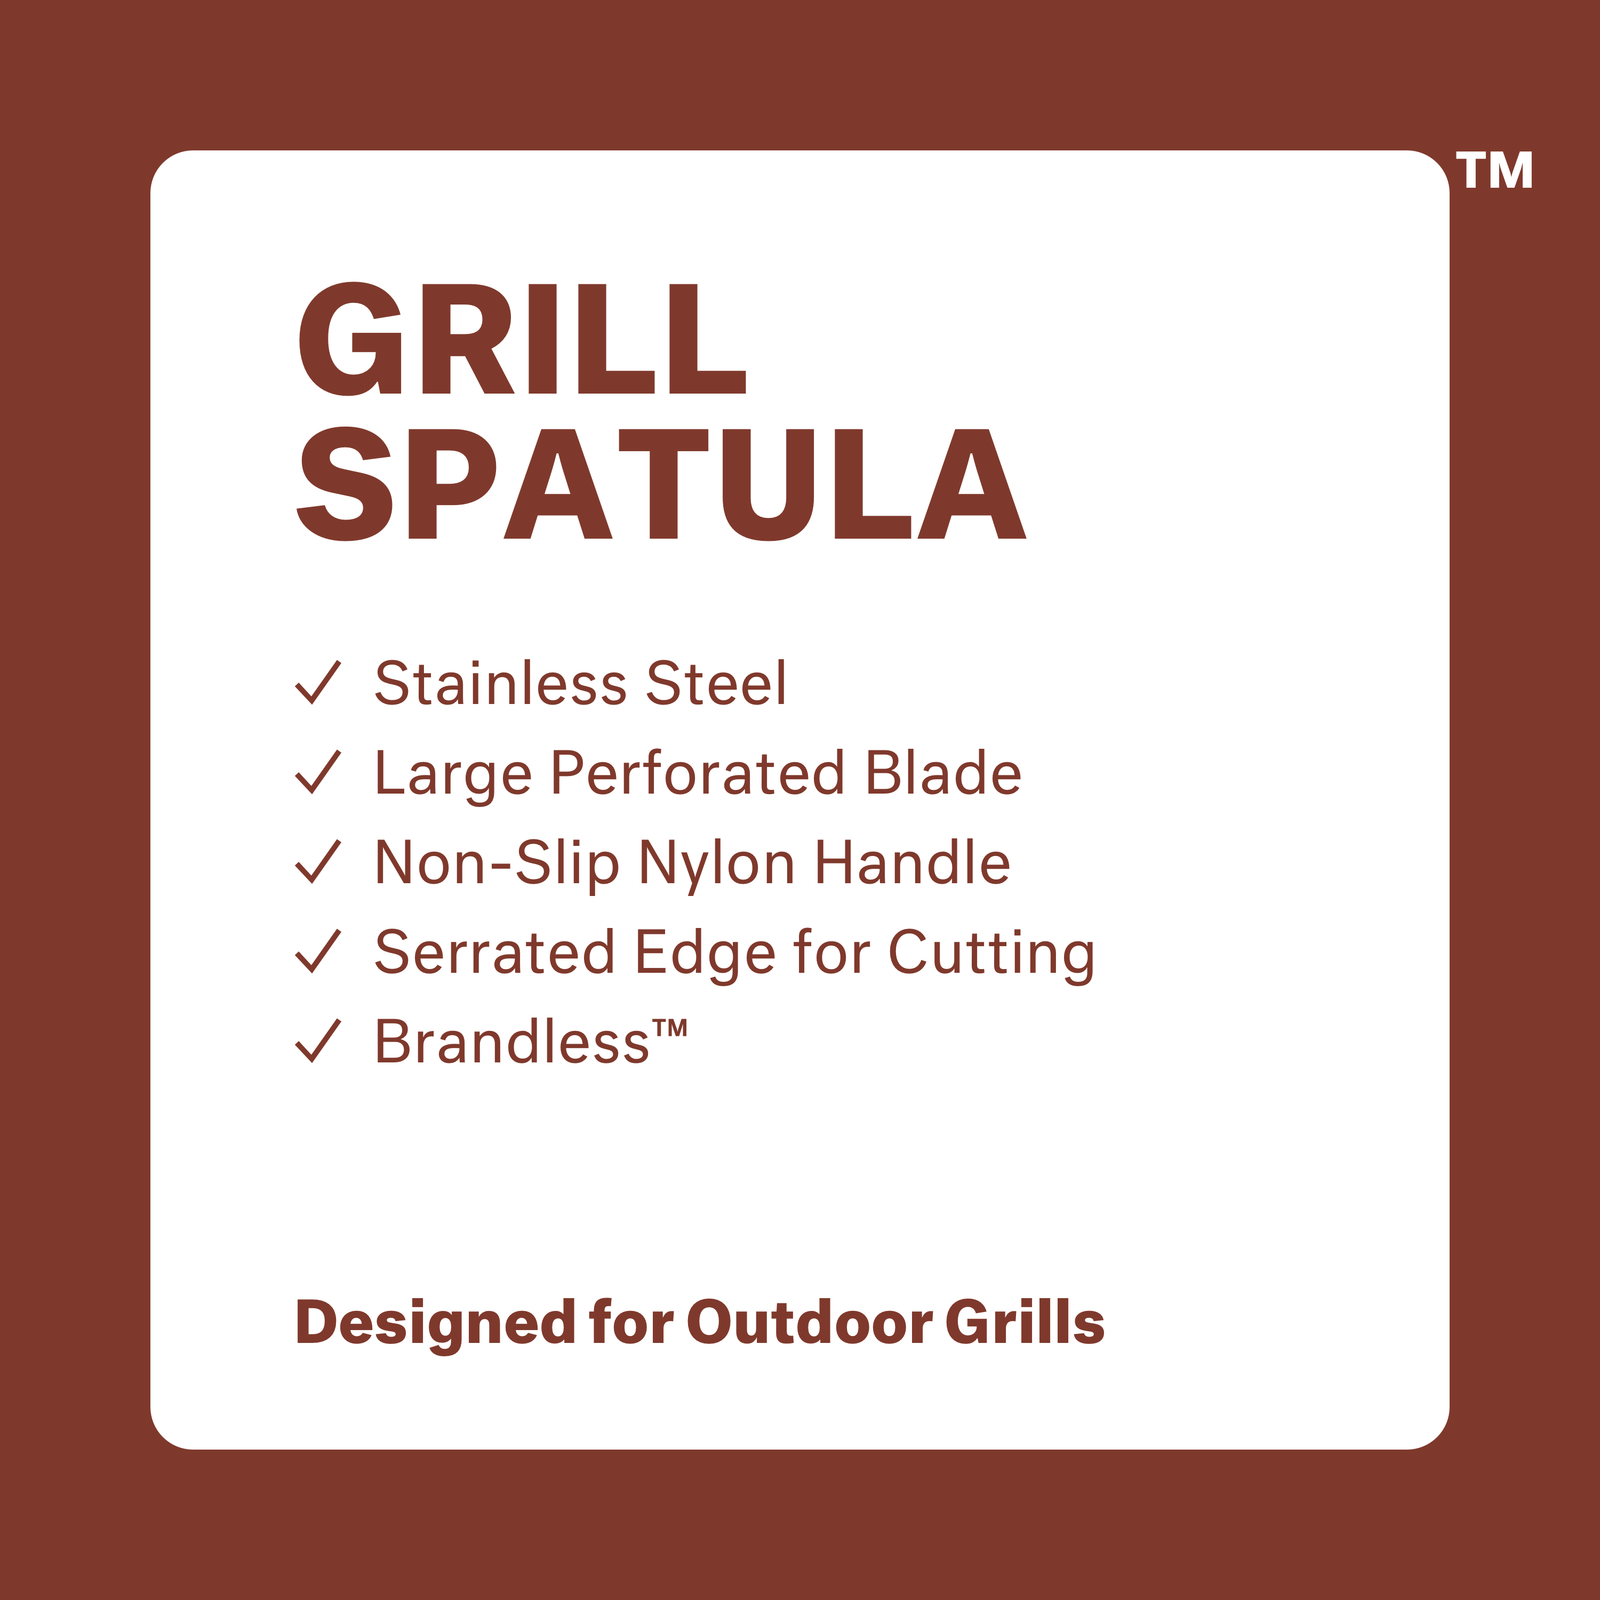 https://cdn.shopify.com/s/files/1/0291/6427/3757/products/53051_grill_spatula_atsw_1600x.png?v=1671780642